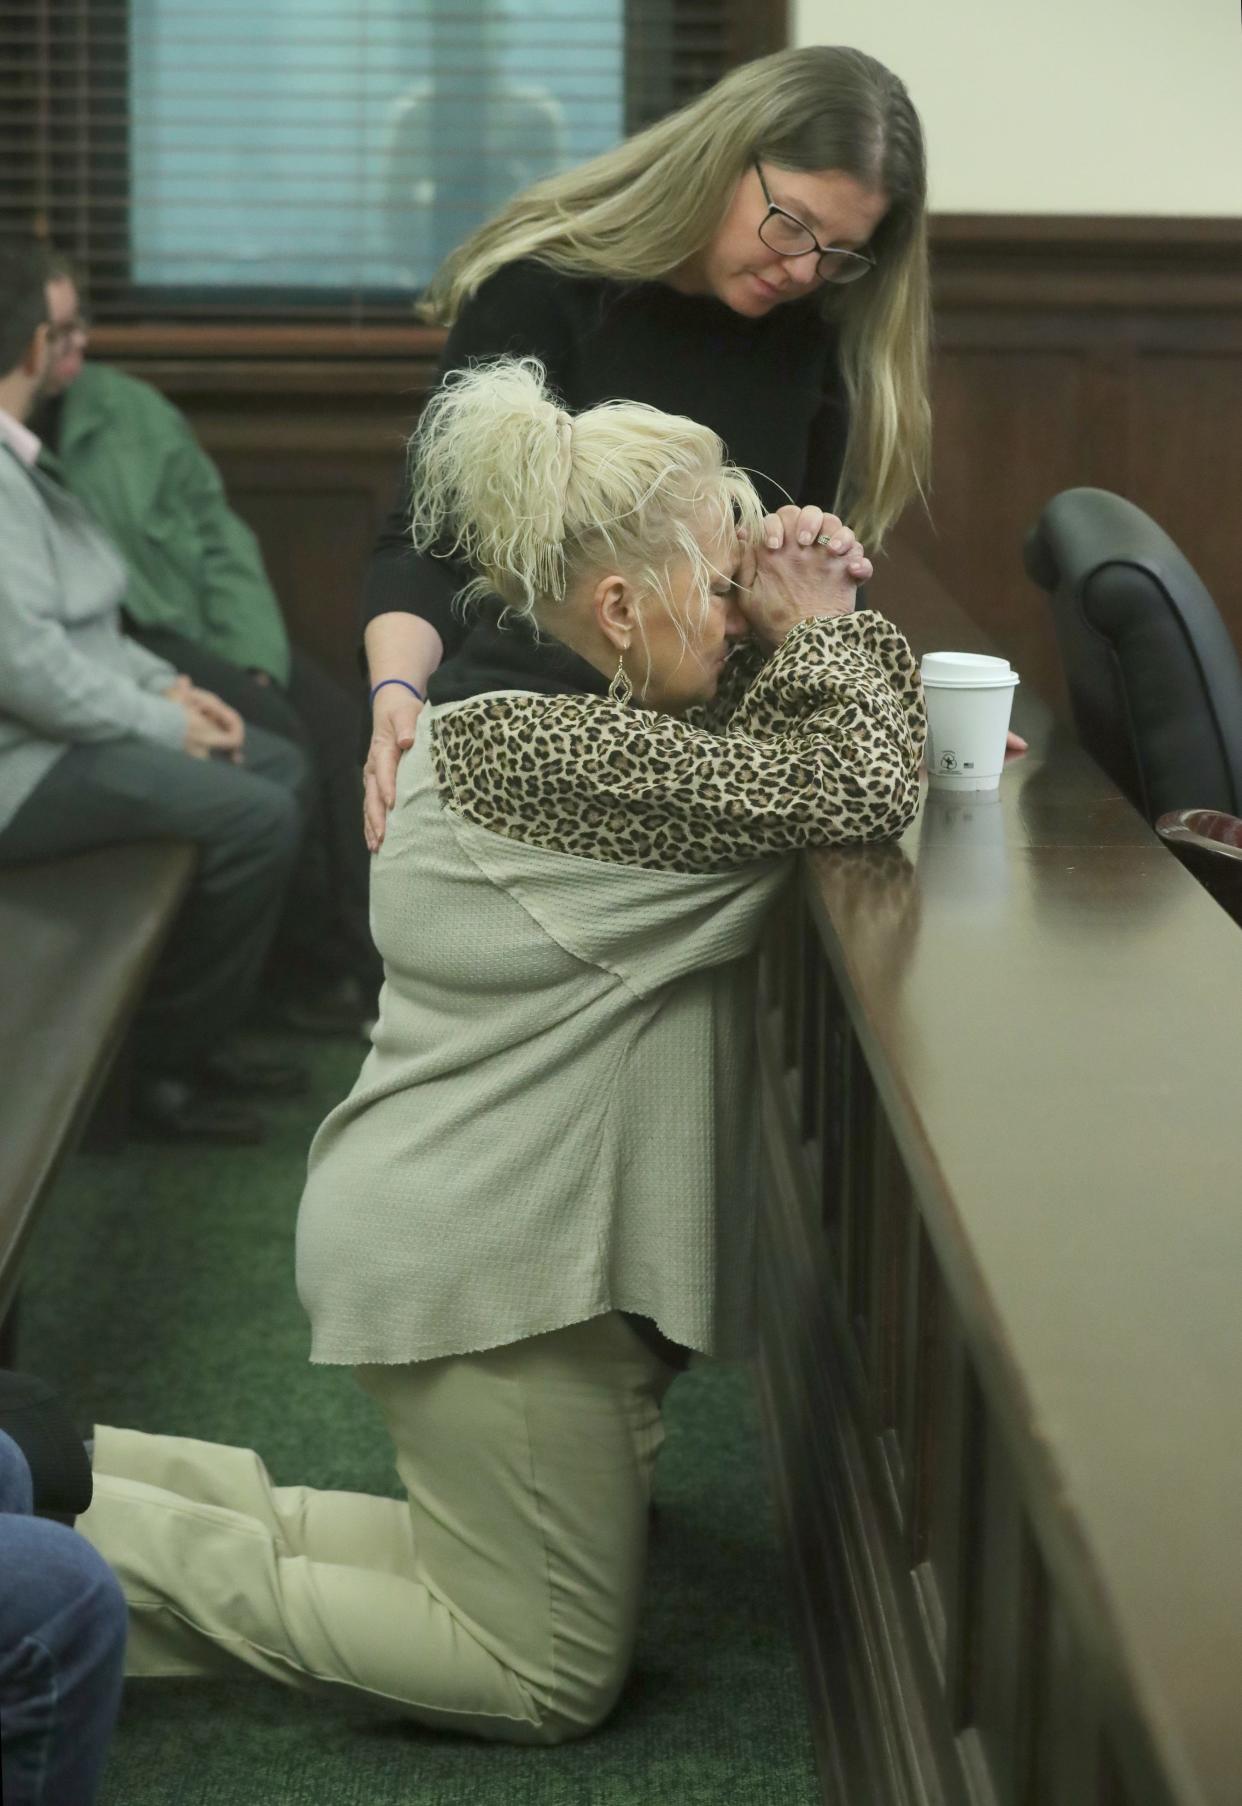 Kim Biggs, mother of murder victim Ashley Biggs, is comforted by victim advocate Katie Thompson while waiting for a jury to return with a verdict Wednesday in the Erica Stefanko trial in Akron.